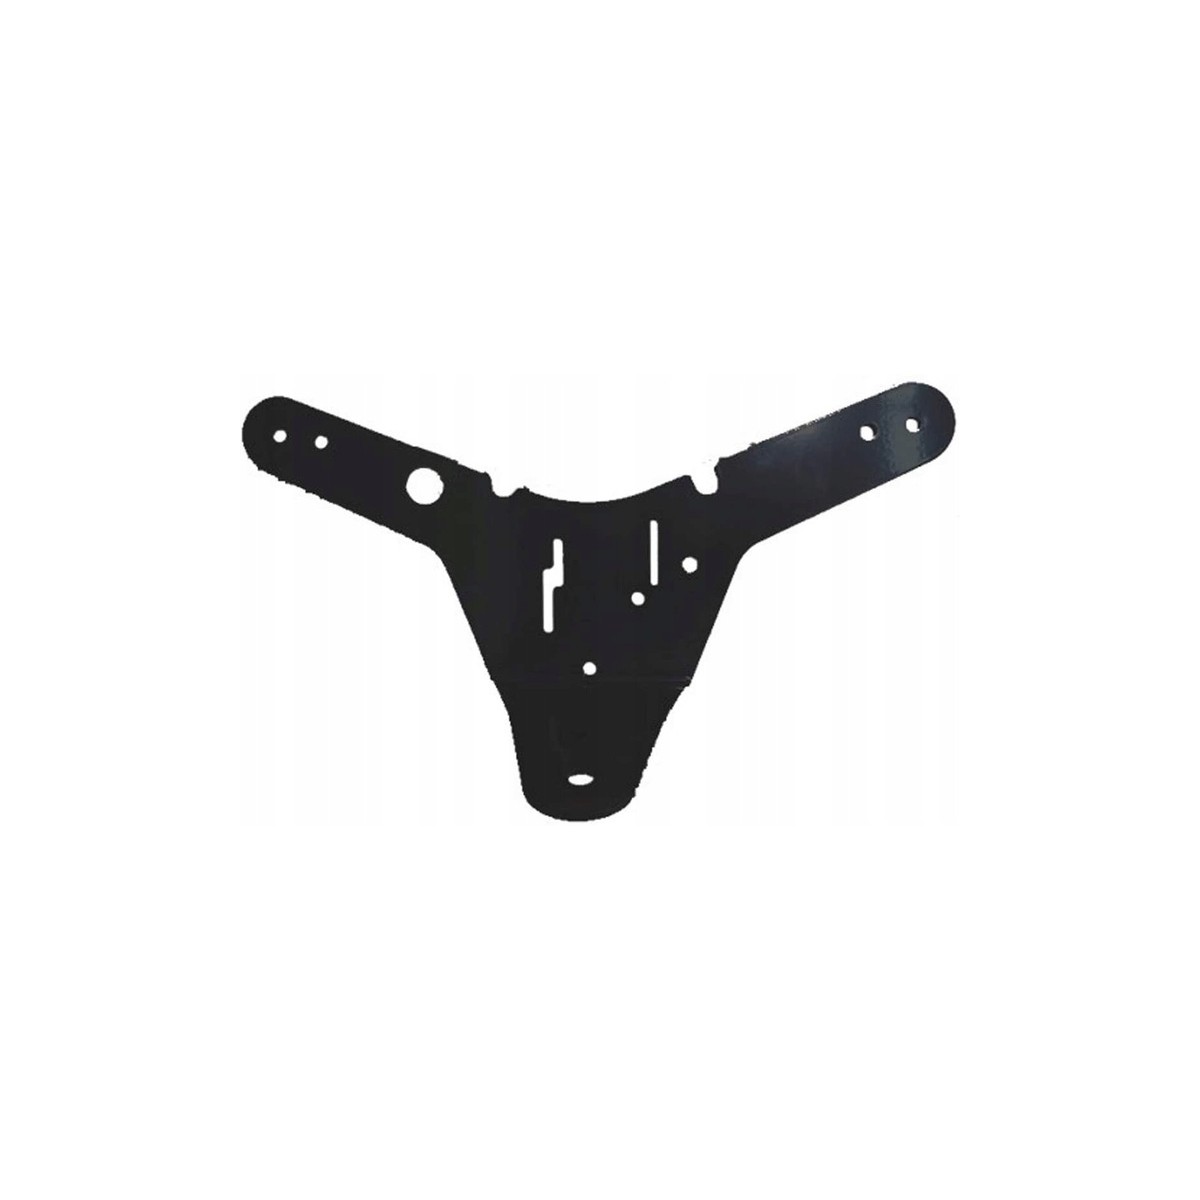 Rear hitch for AL-KO Comfort tractor